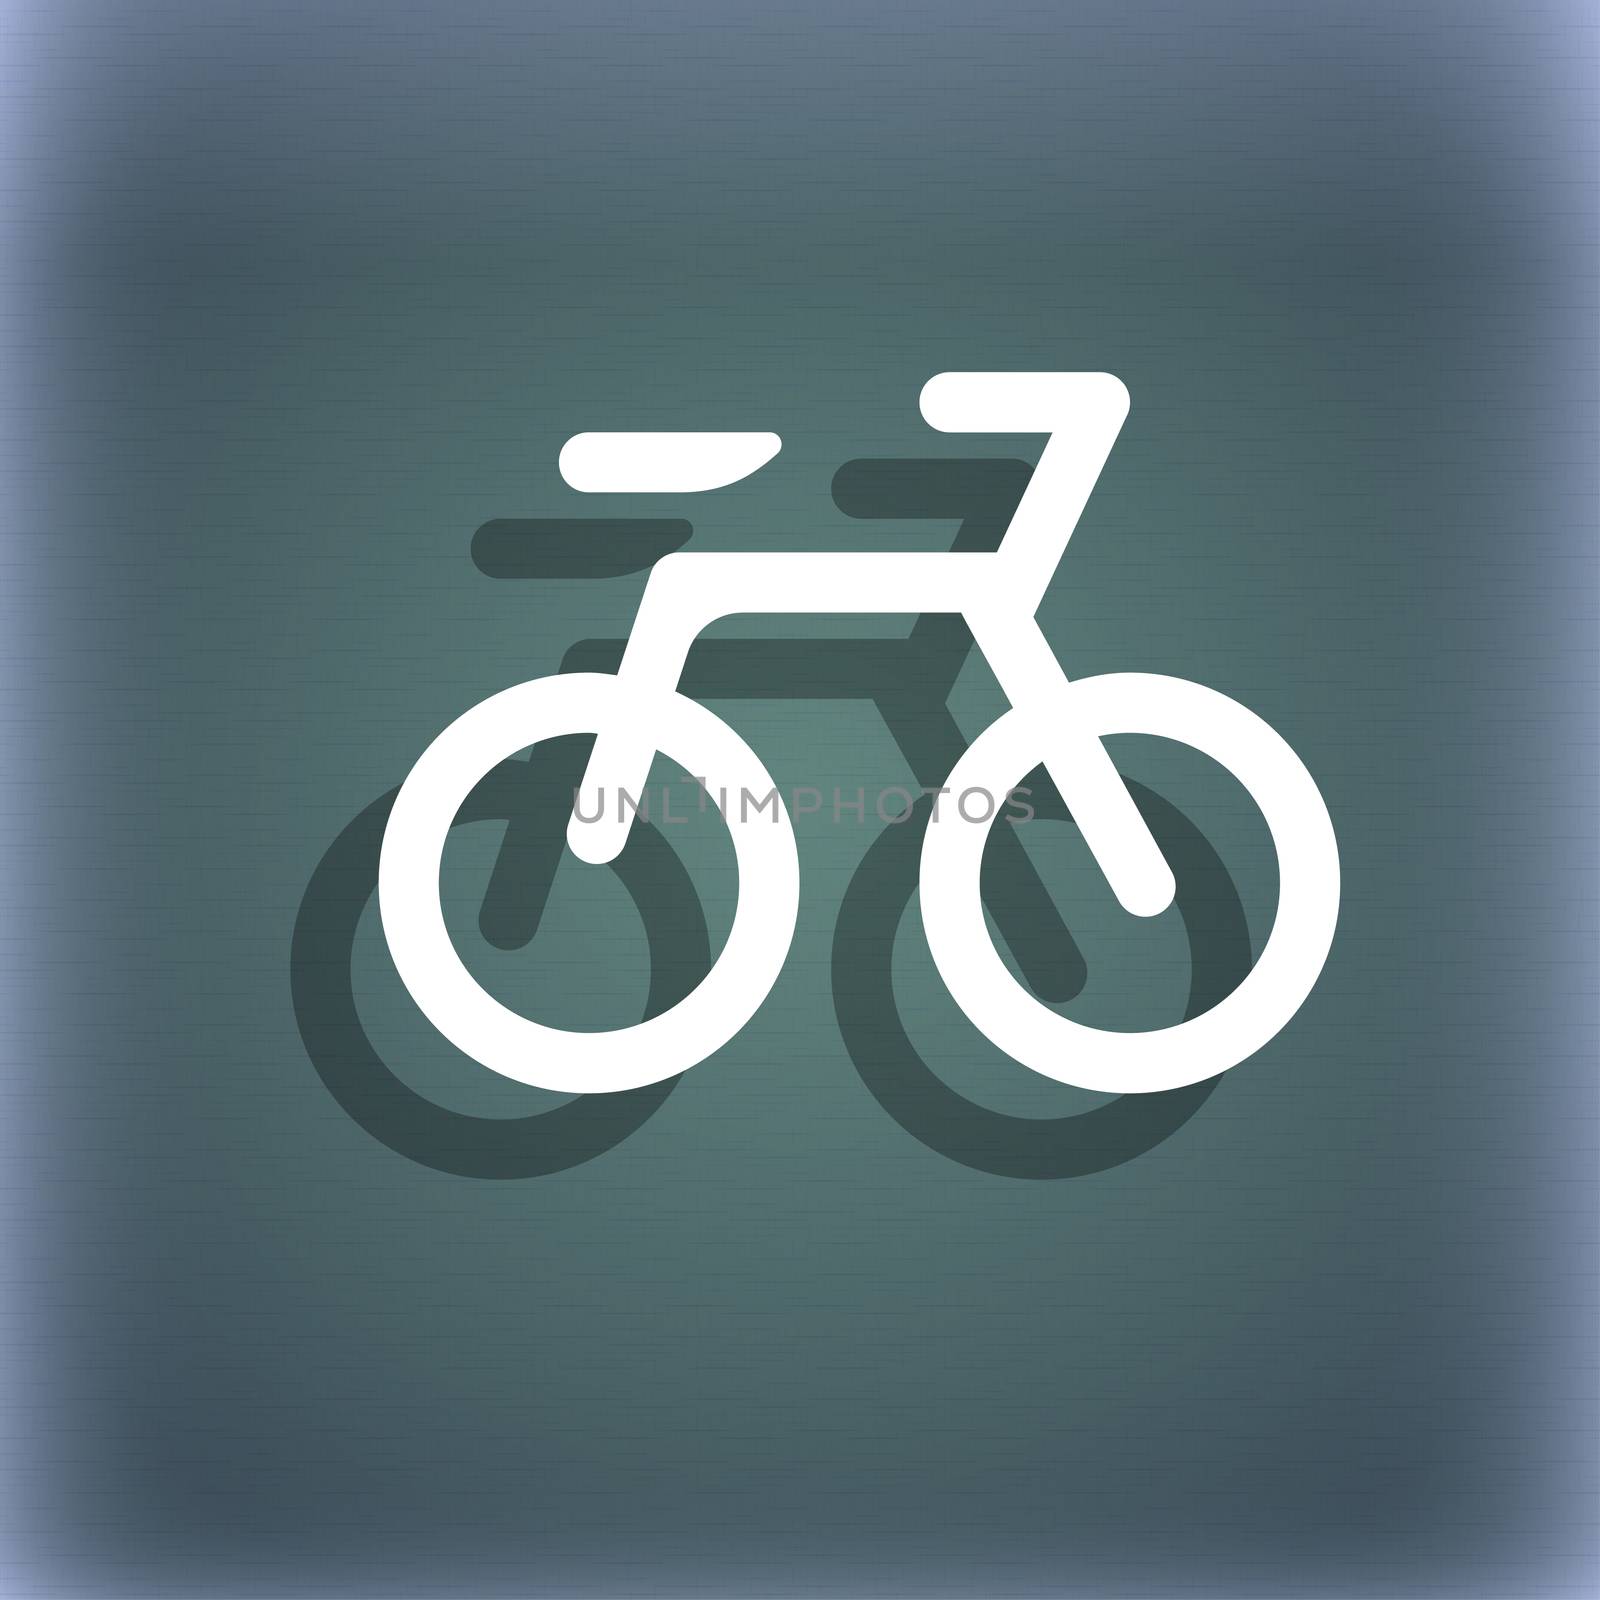 Bicycle icon symbol on the blue-green abstract background with shadow and space for your text. illustration